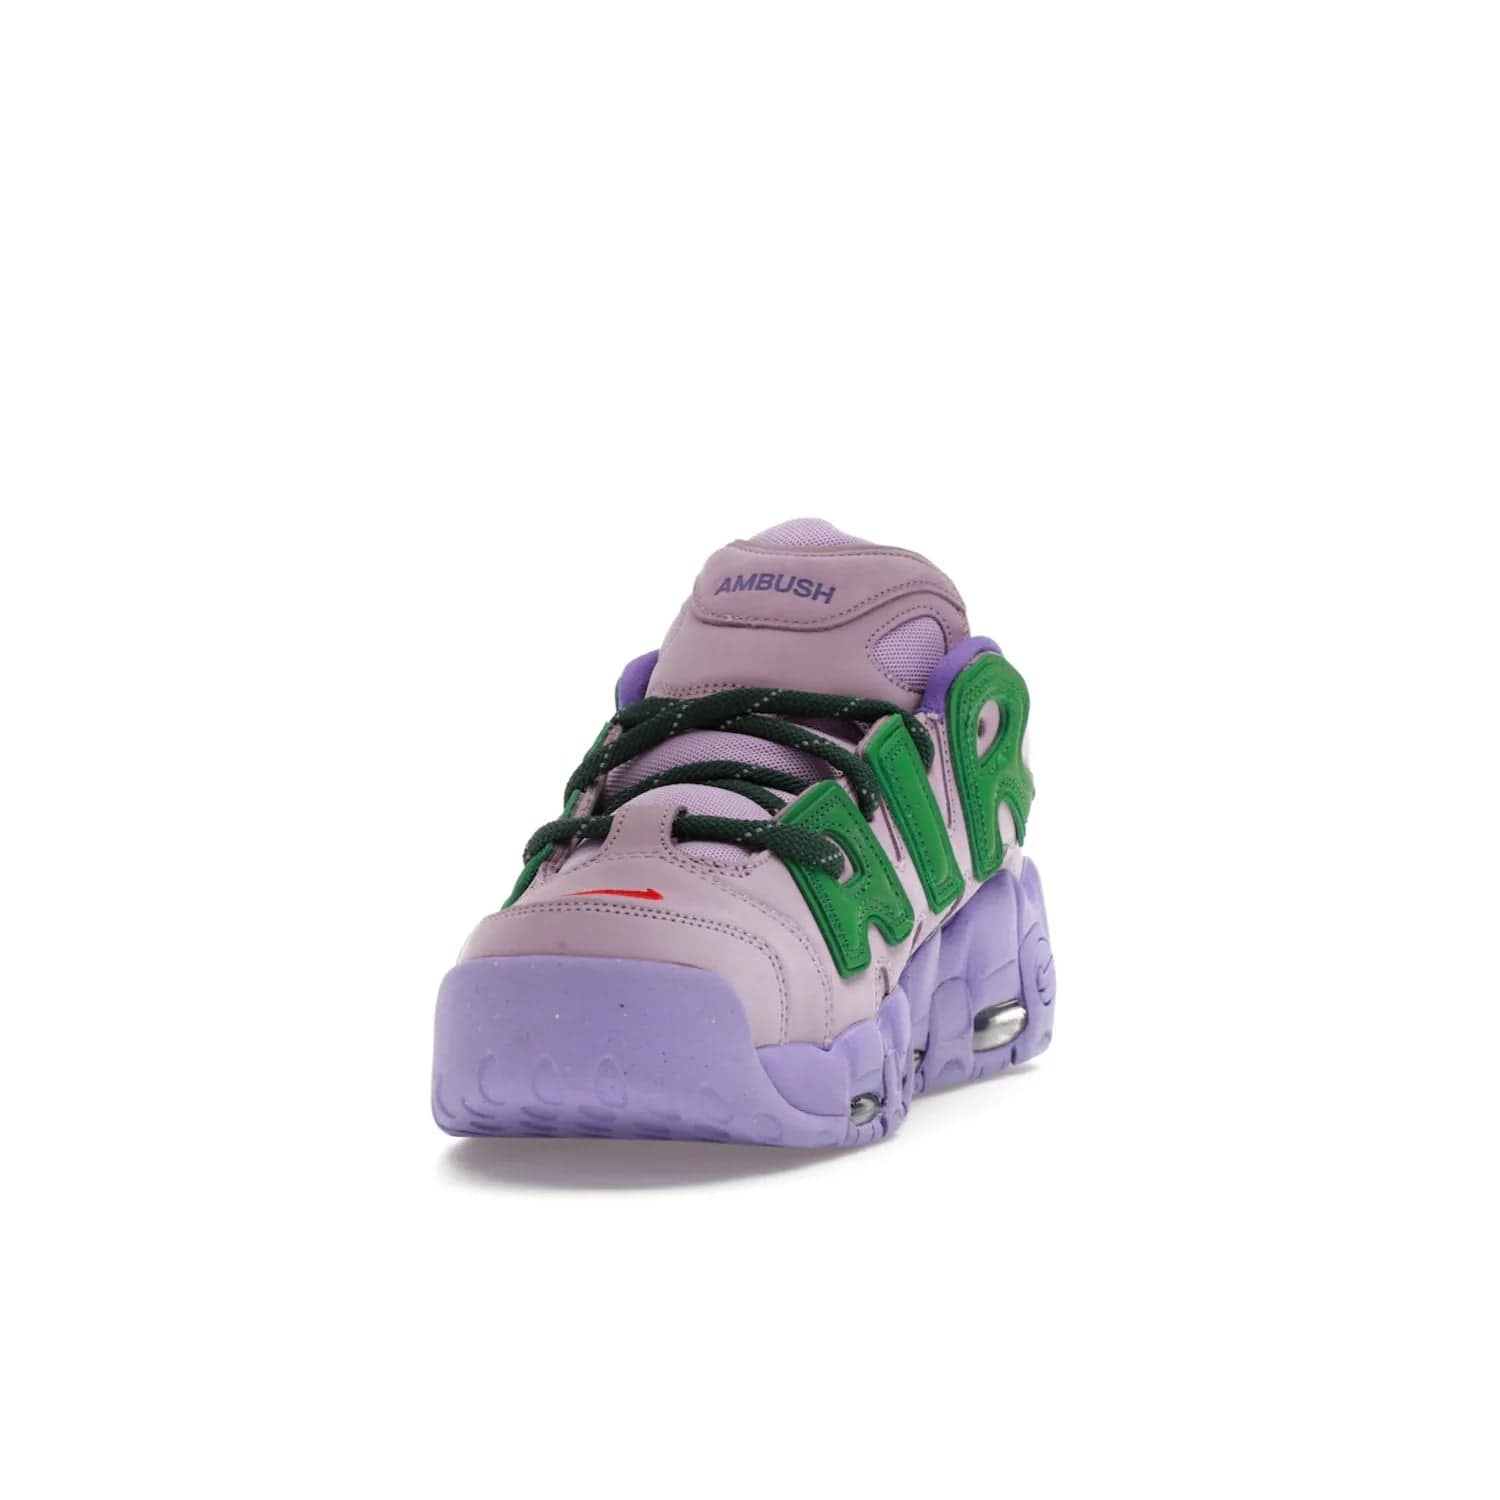 Nike Air More Uptempo Low AMBUSH Lilac - Image 12 - Only at www.BallersClubKickz.com - Style and comfort meet with the Nike Air More Uptempo Low AMBUSH Lilac. Featuring a vibrant Lilac upper with Apple Green and University Red accents, this unique design will be a standout in any wardrobe. Get your pair on October 06, 2023.